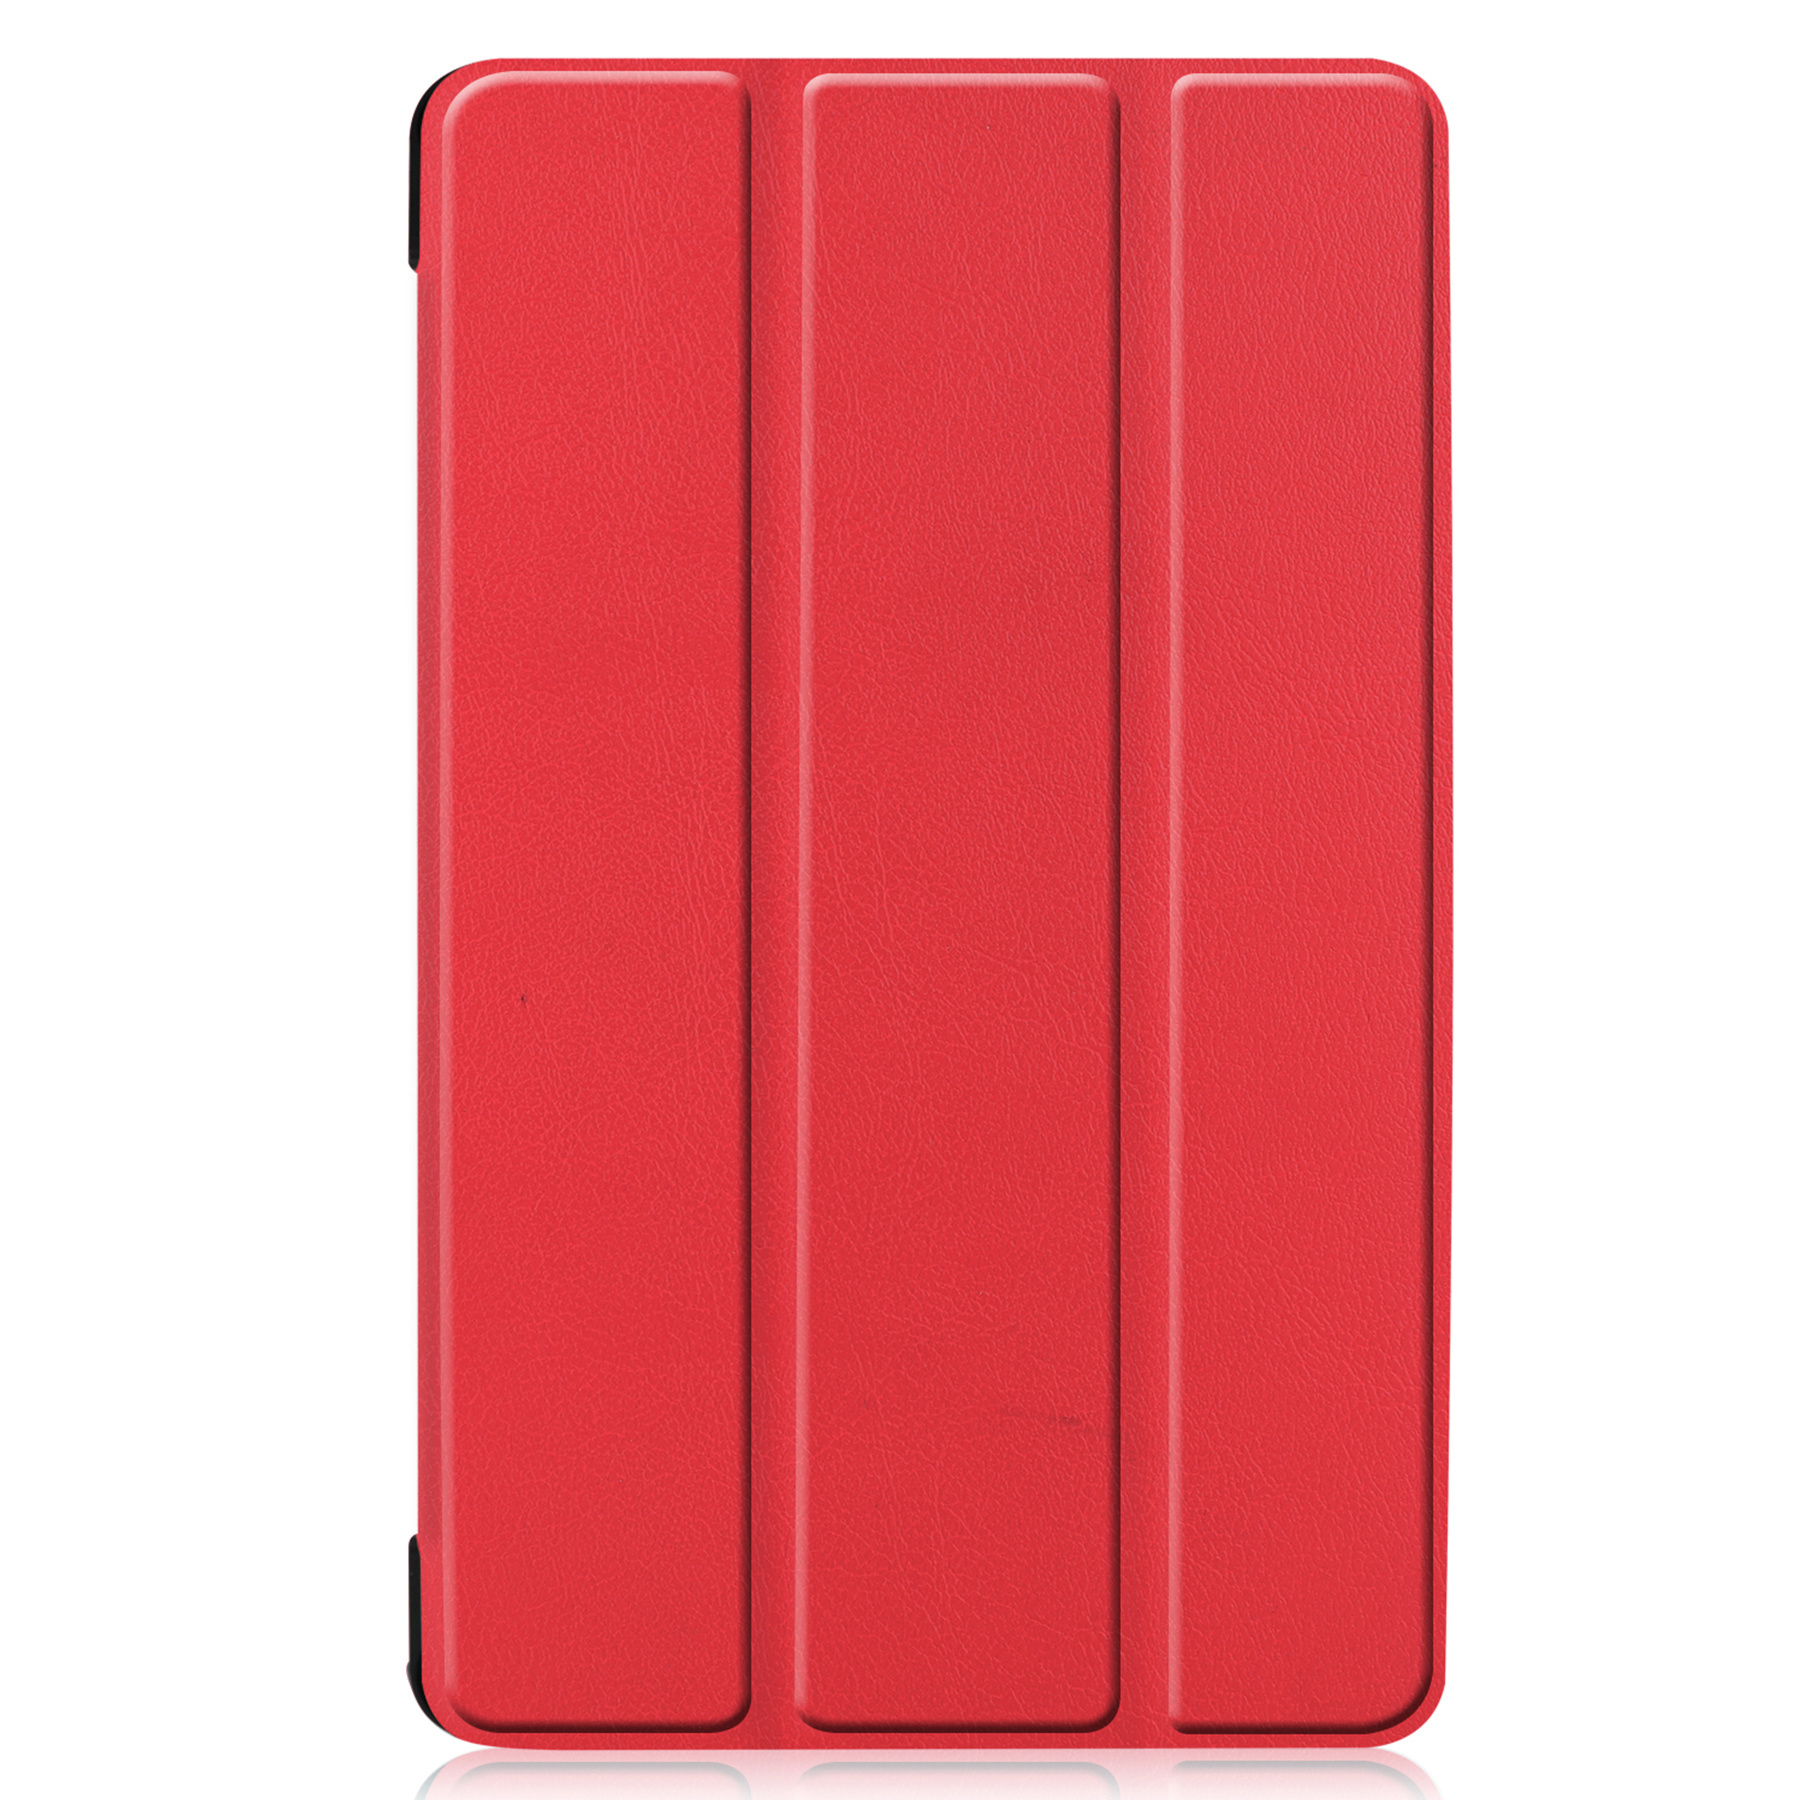 BASEY. Samsung Galaxy Tab A 8.0 2019 Hoes Book Case Luxe Hoesje Met Screenprotector - Samsung Galaxy Tab A 8.0 (2019) Hoesje Book Case Hoes - Rood